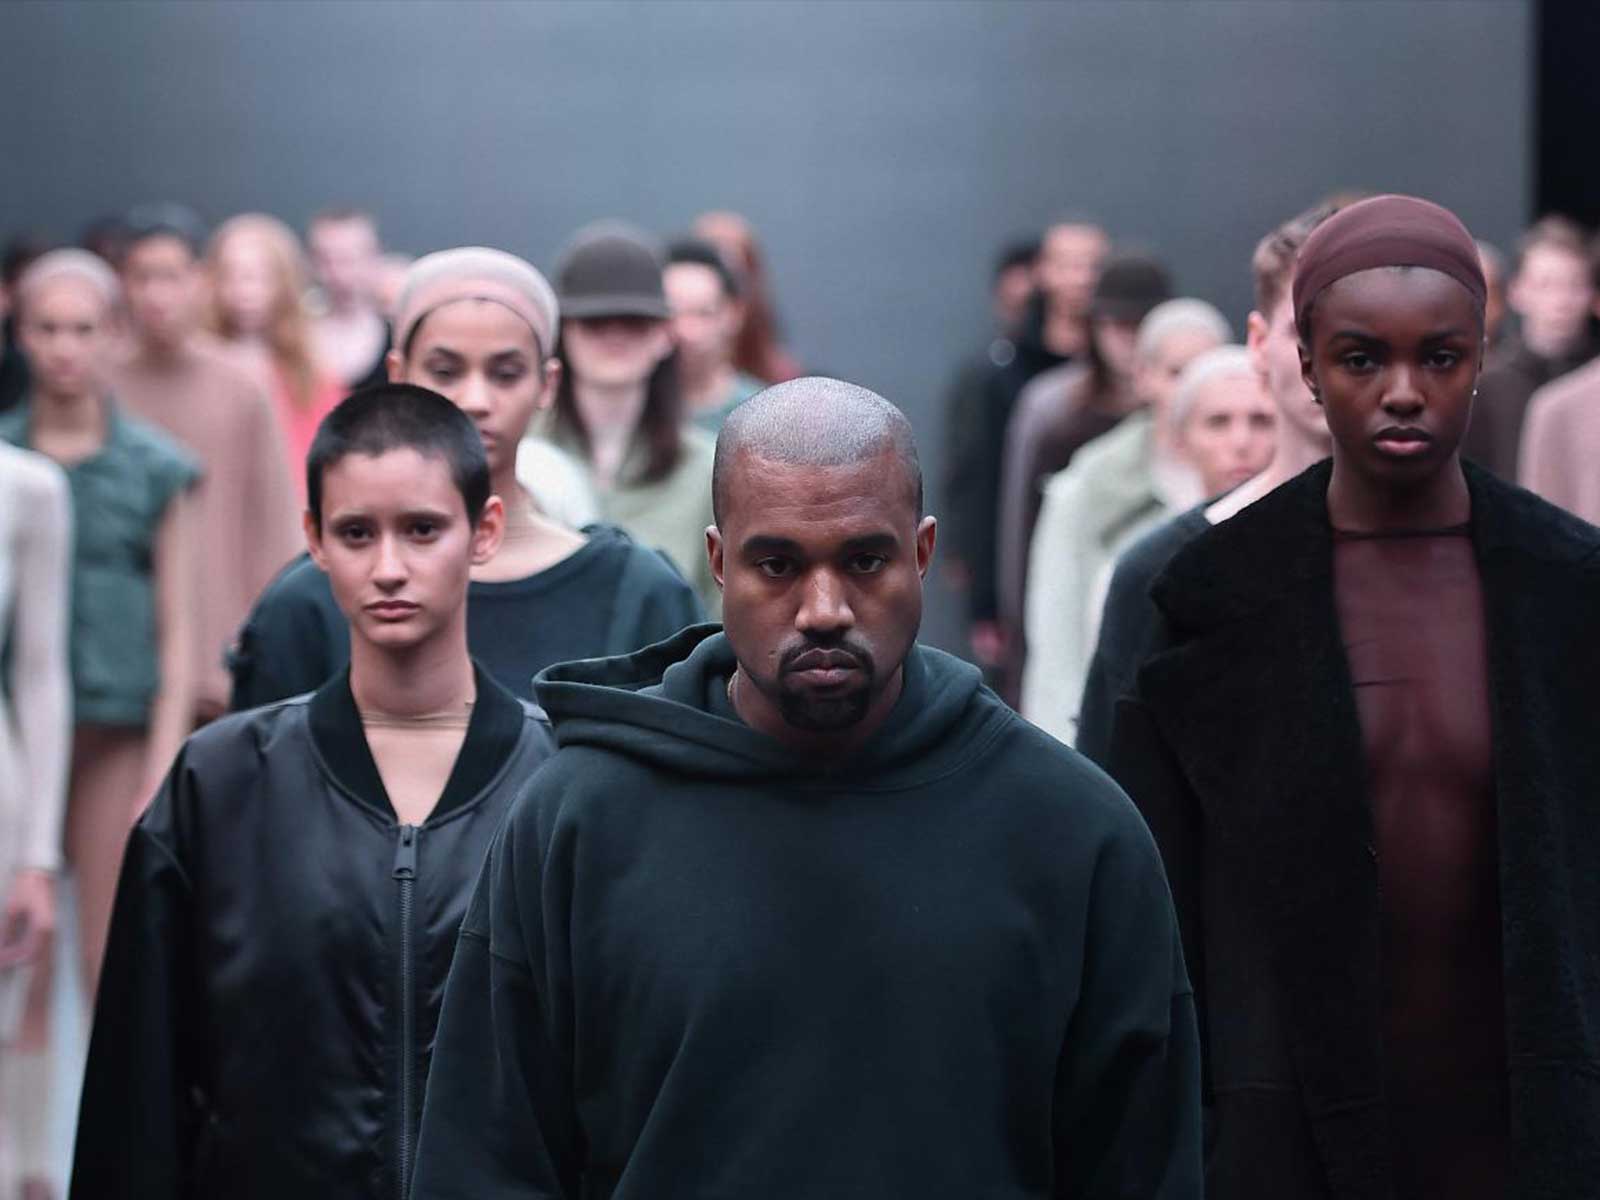 Former YEEZY employees sue Kanye West for sexual extortion